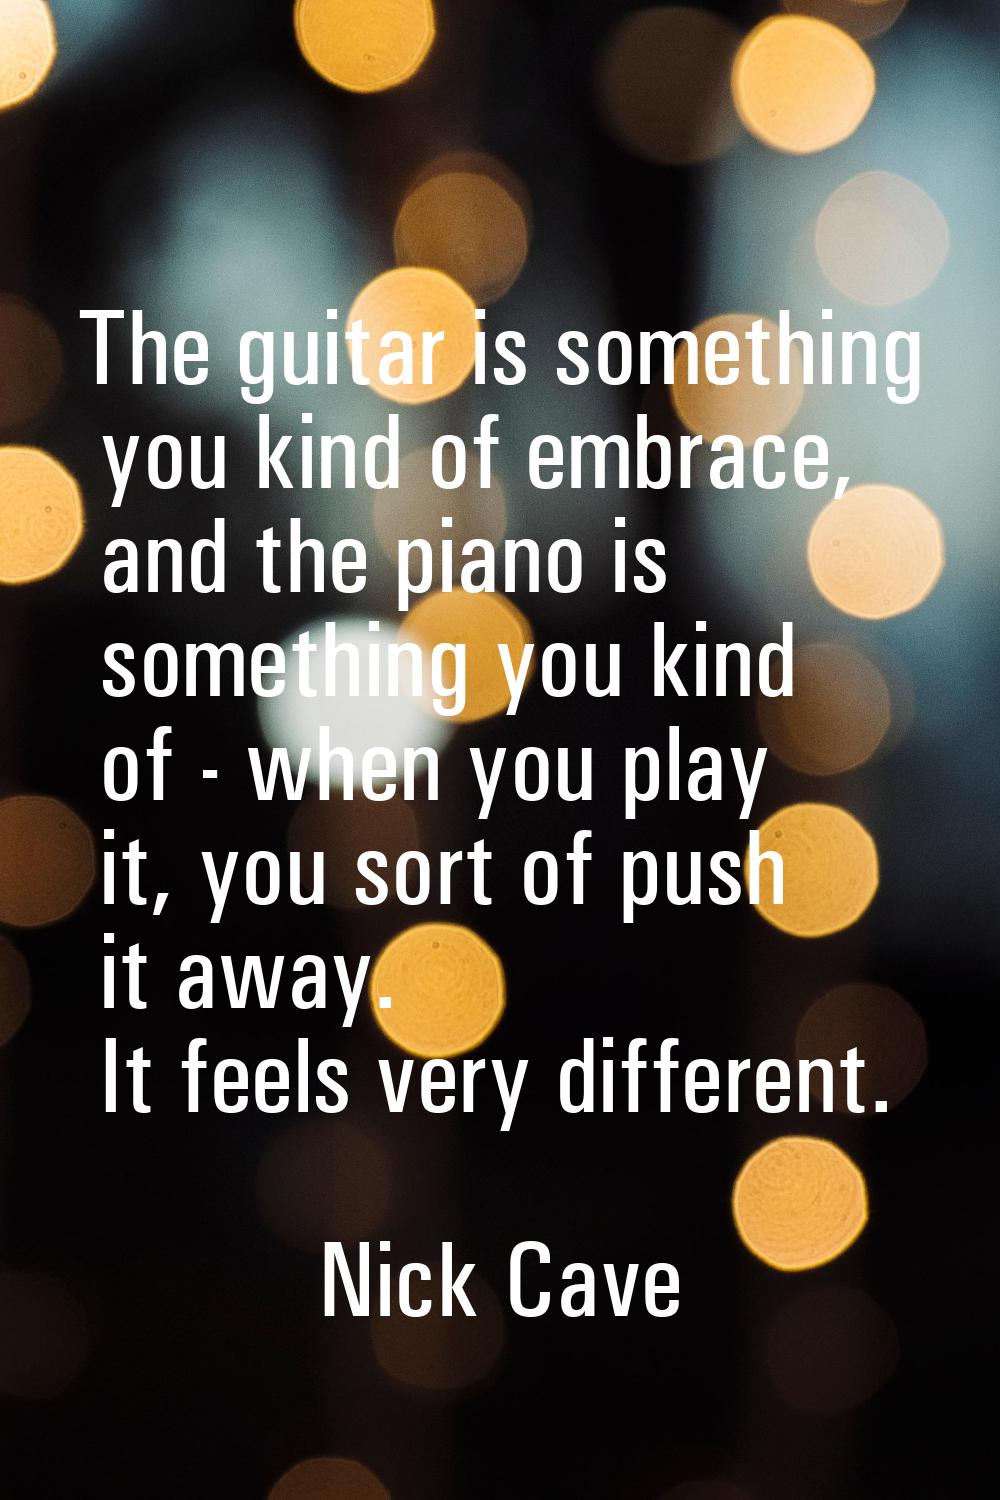 The guitar is something you kind of embrace, and the piano is something you kind of - when you play